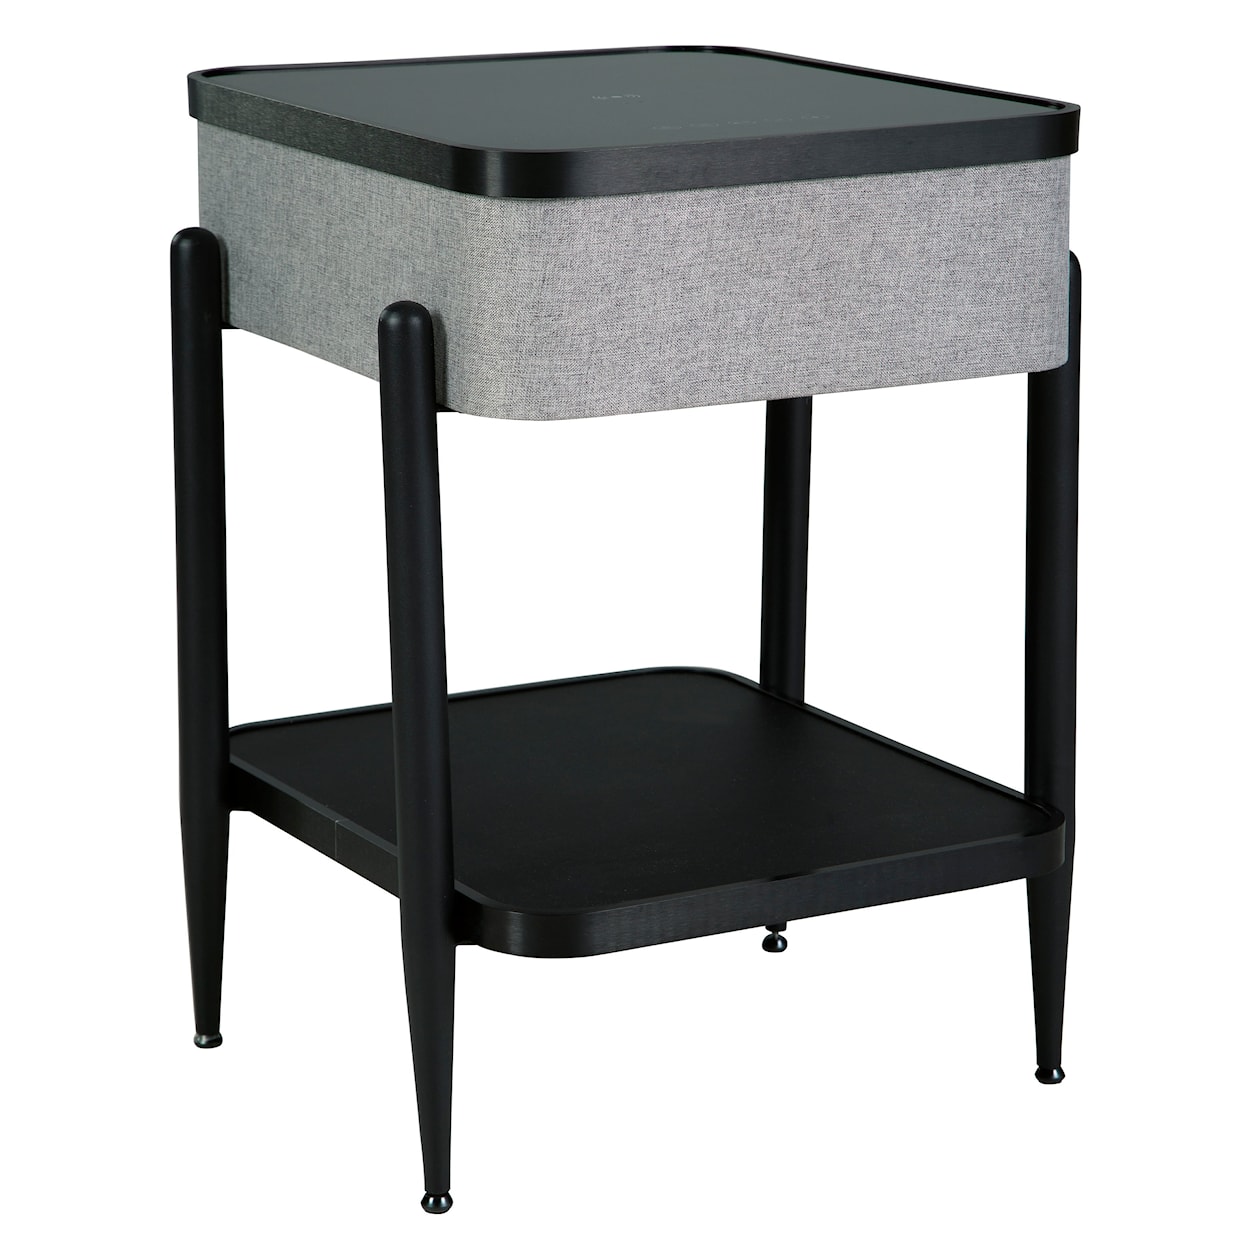 Signature Design by Ashley Jorvalee Accent Table